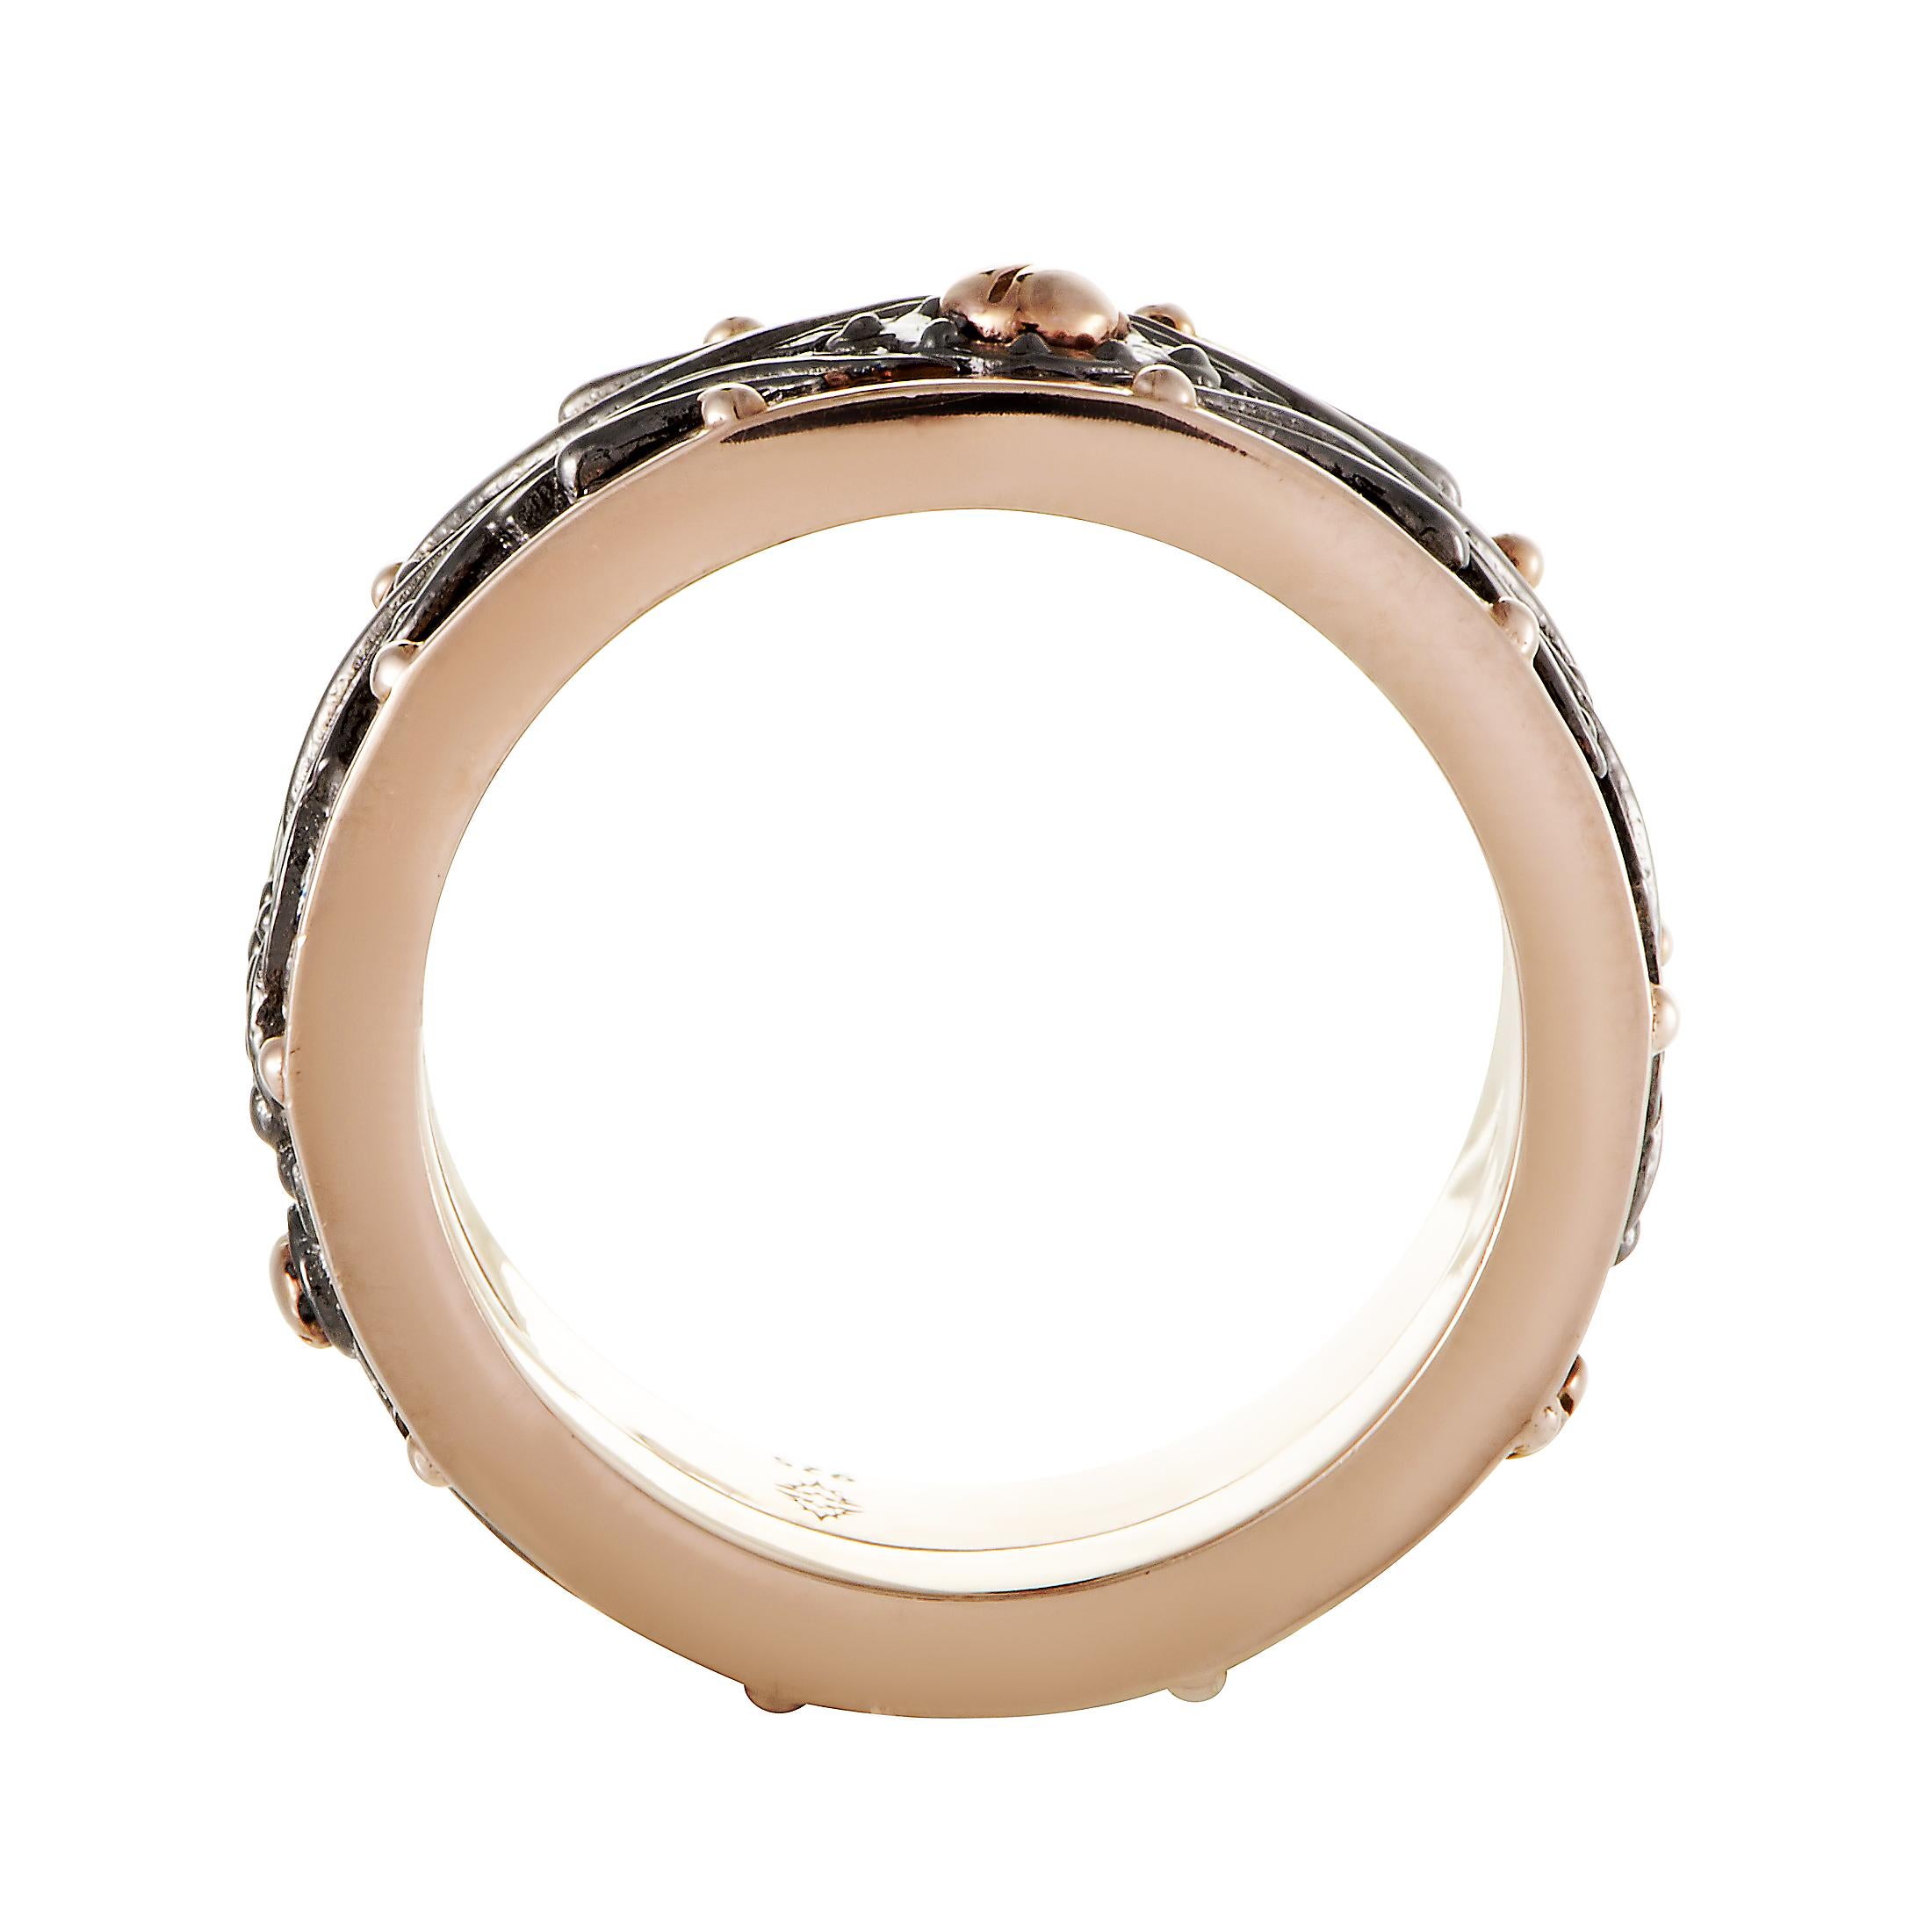 Producing a captivating eye-catching effect with its tastefully contrasting tones and alluringly drawing you in to admire its intricate ornamentation, this strikingly bold silver ring with rose gold plating is a fantastic item for men from the